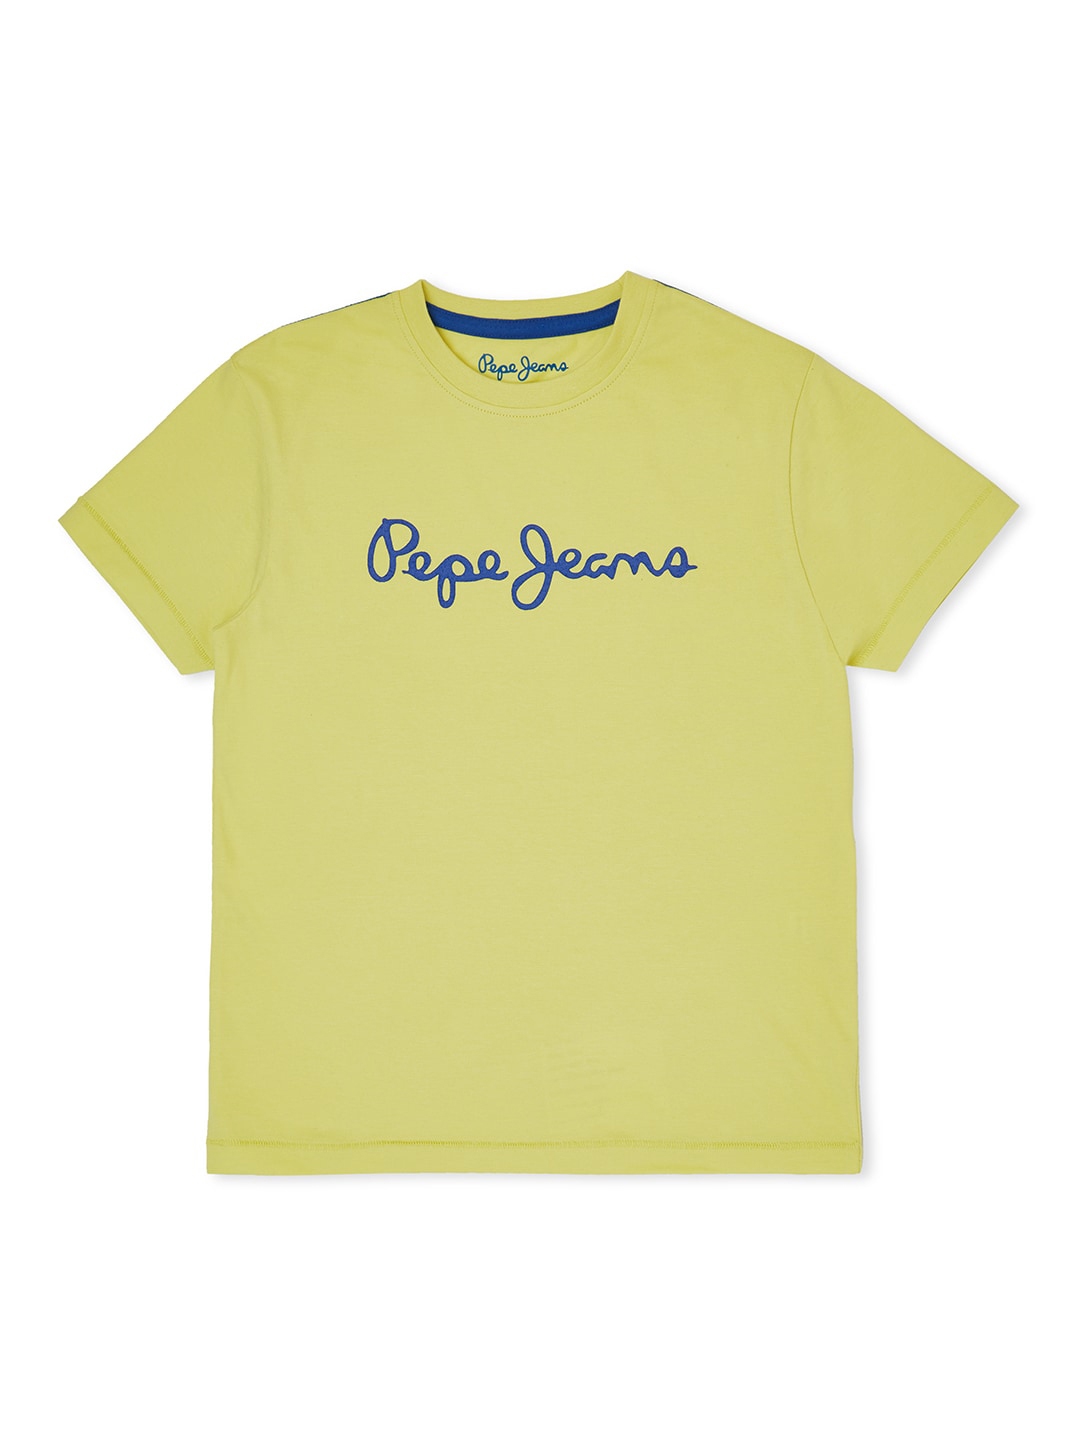 Buy Pepe Jeans Boys Lime Green & Blue Brand Logo Round Neck Cotton T ...